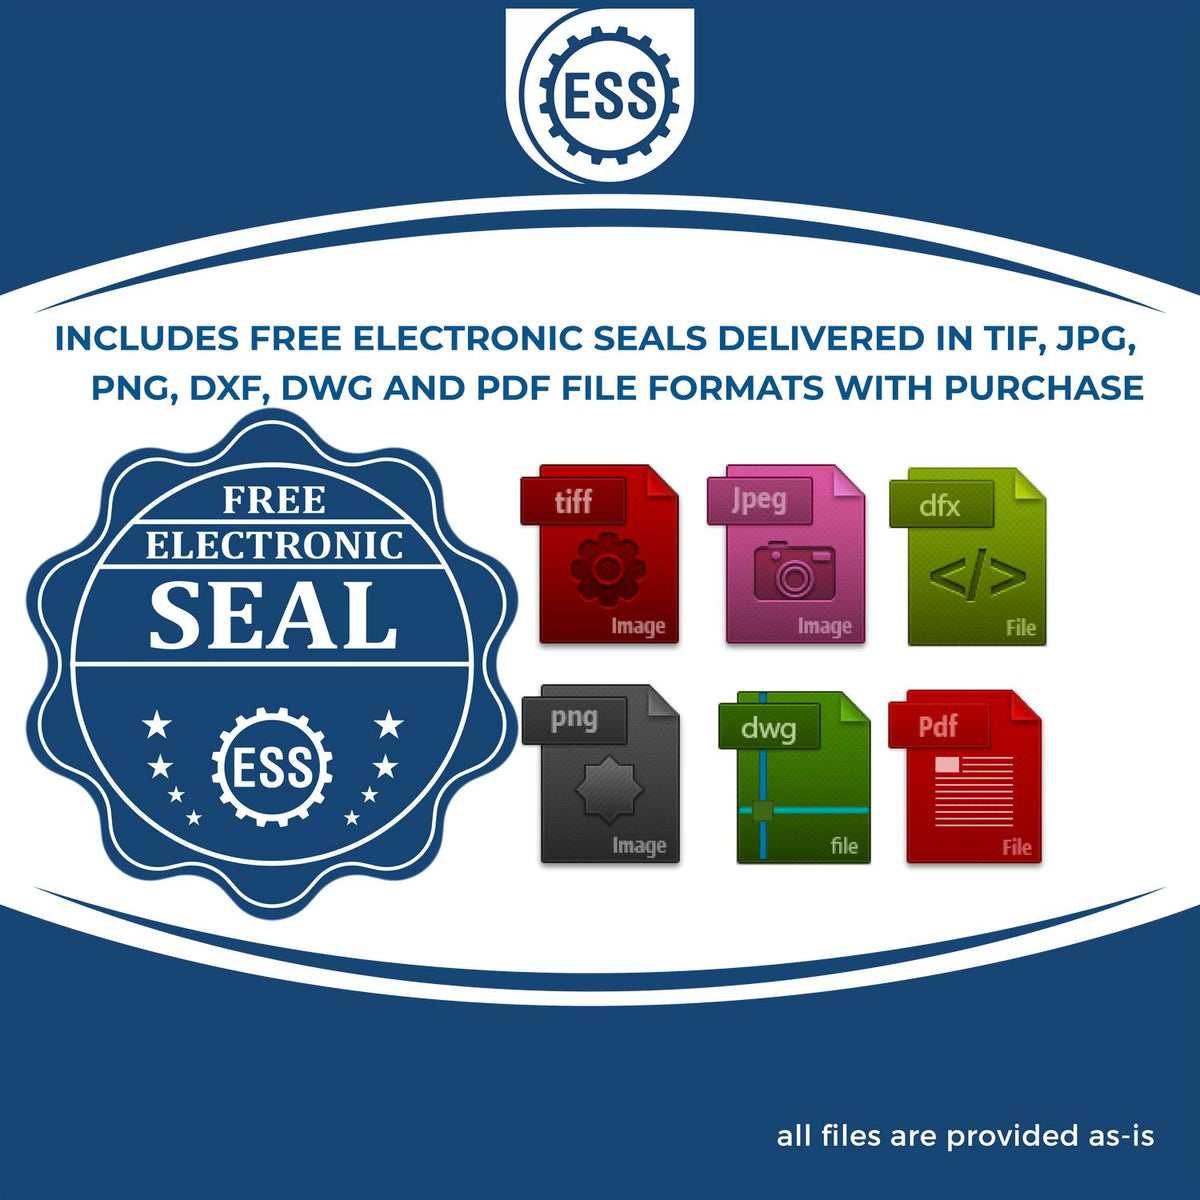 An infographic for the free electronic seal for the Handheld Kansas Professional Engineer Embosser illustrating the different file type icons such as DXF, DWG, TIF, JPG and PNG.